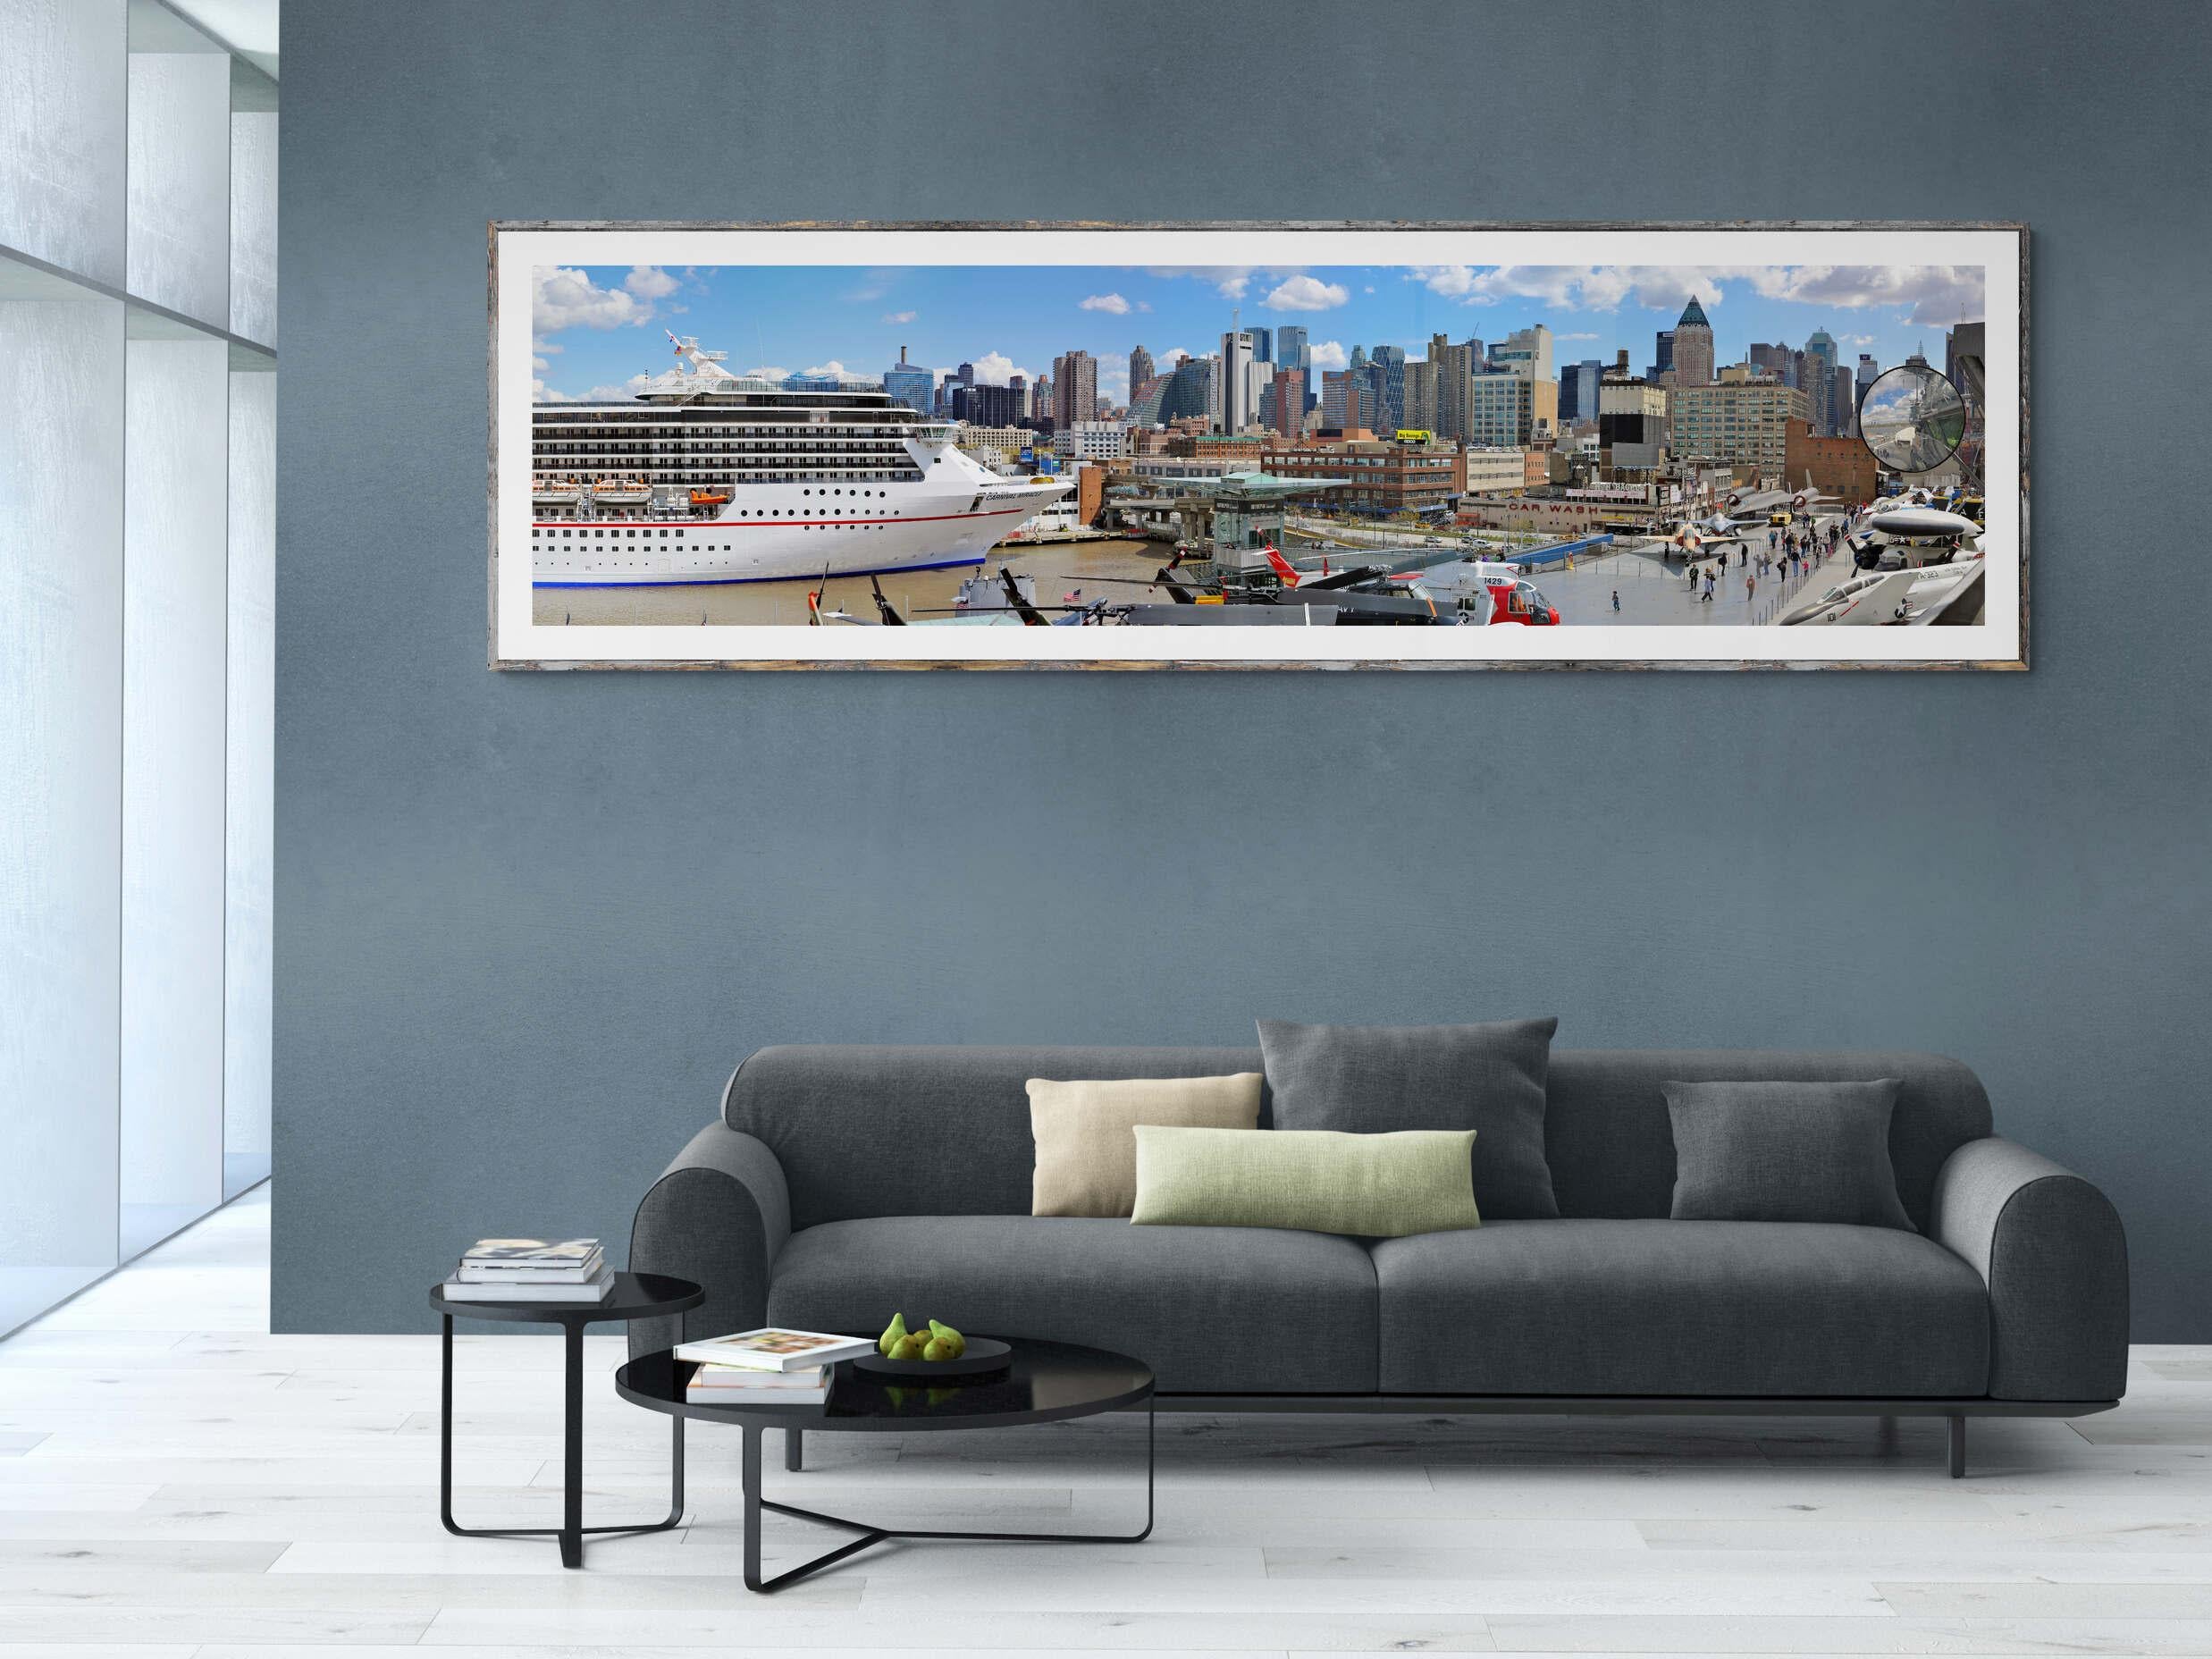 Pigment photographic paper - photography & fine art print © Jean Pierre De Neef 
Artwork sold in perfect condition from a limited edition of 25 ex- Composition from an assembly of 9 shots made in April 2014
This panoramic montage was made from 9